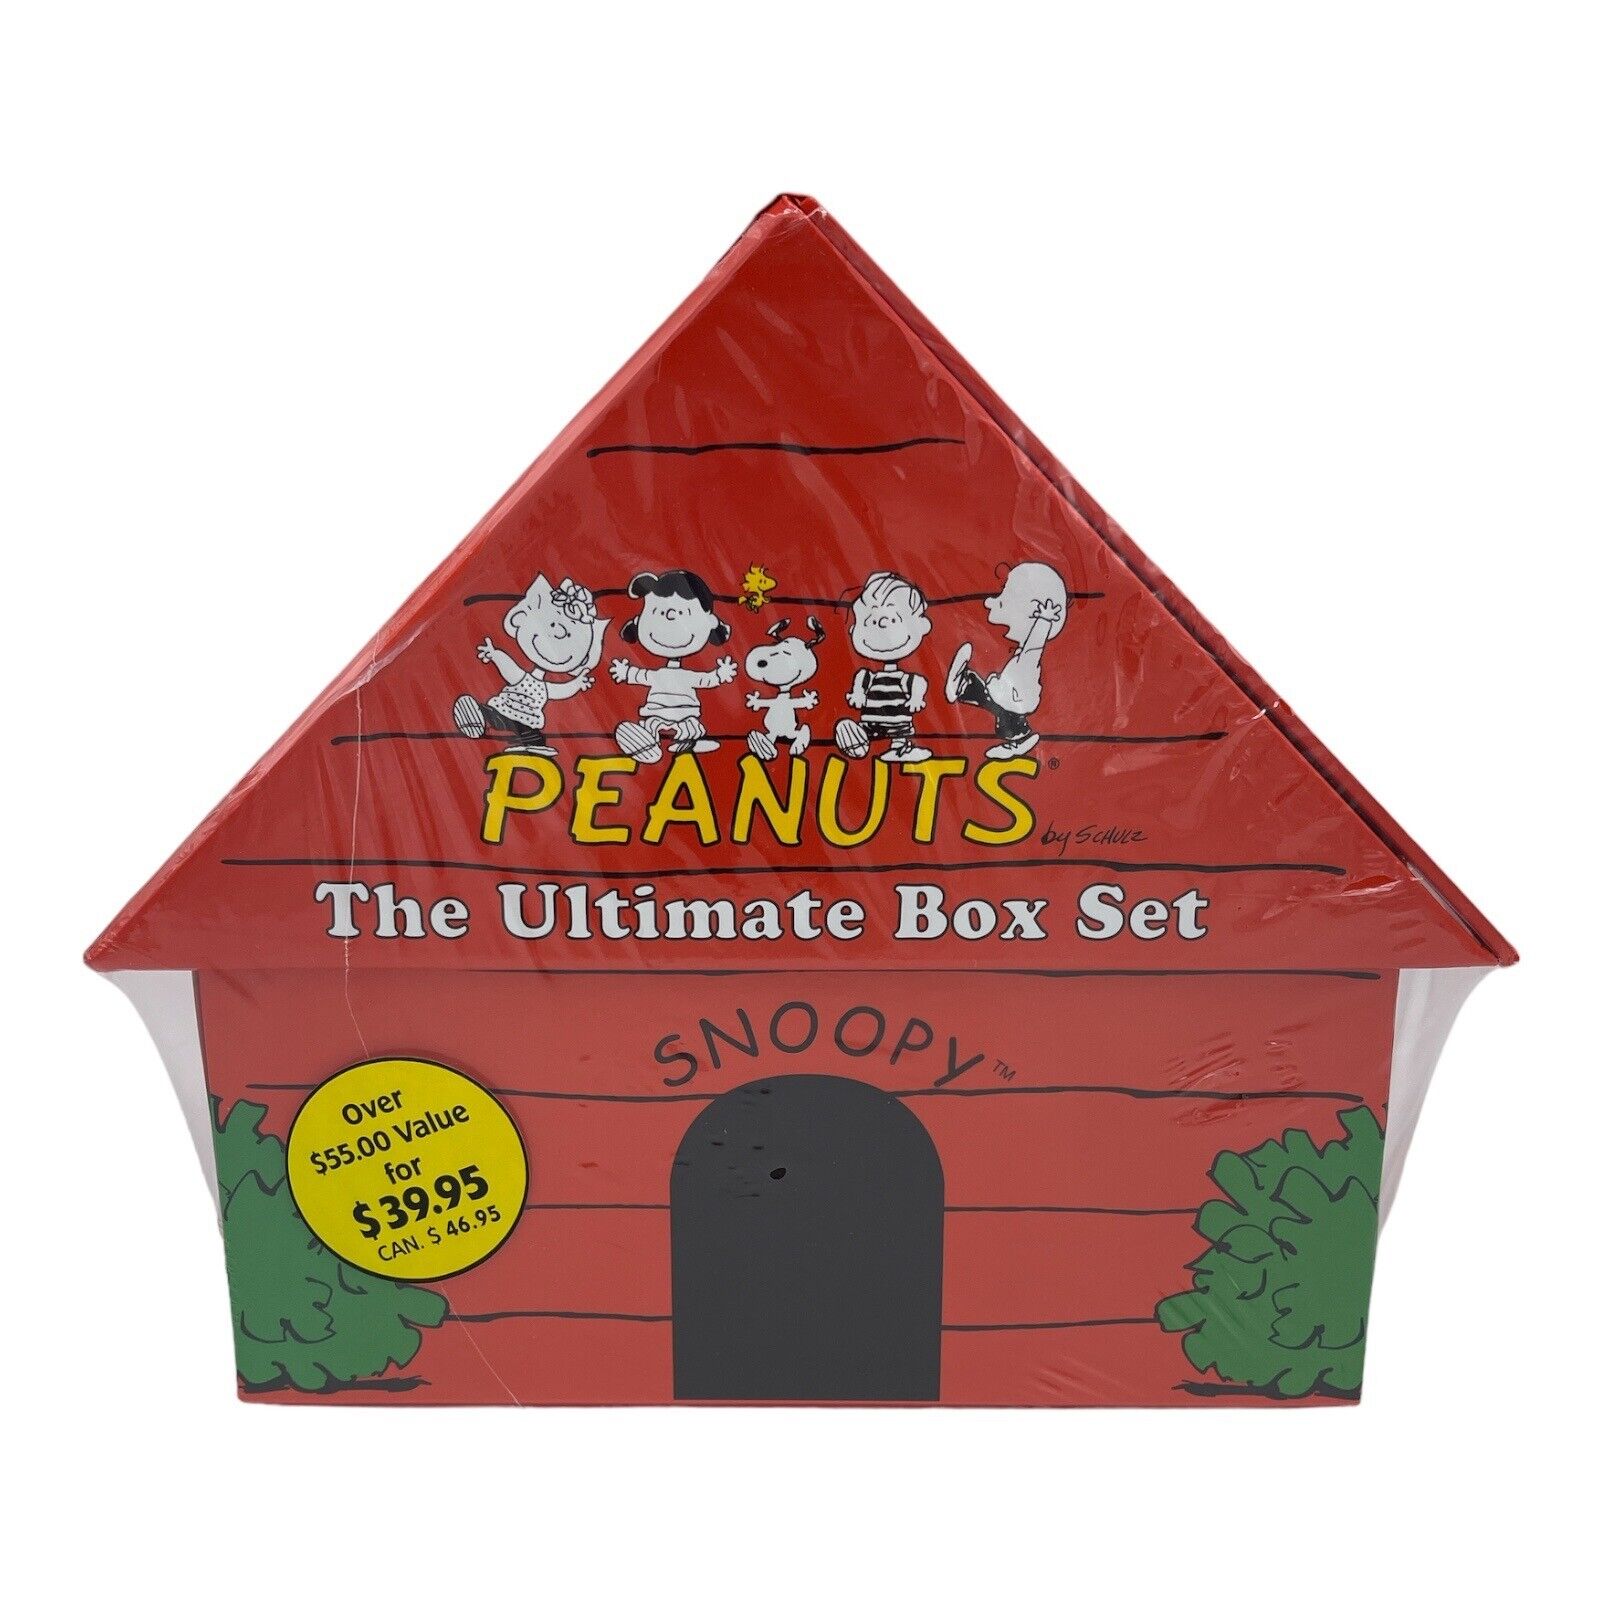 Peanuts Classics by Schulz Collectable The Ultimate 9 Book Box Set